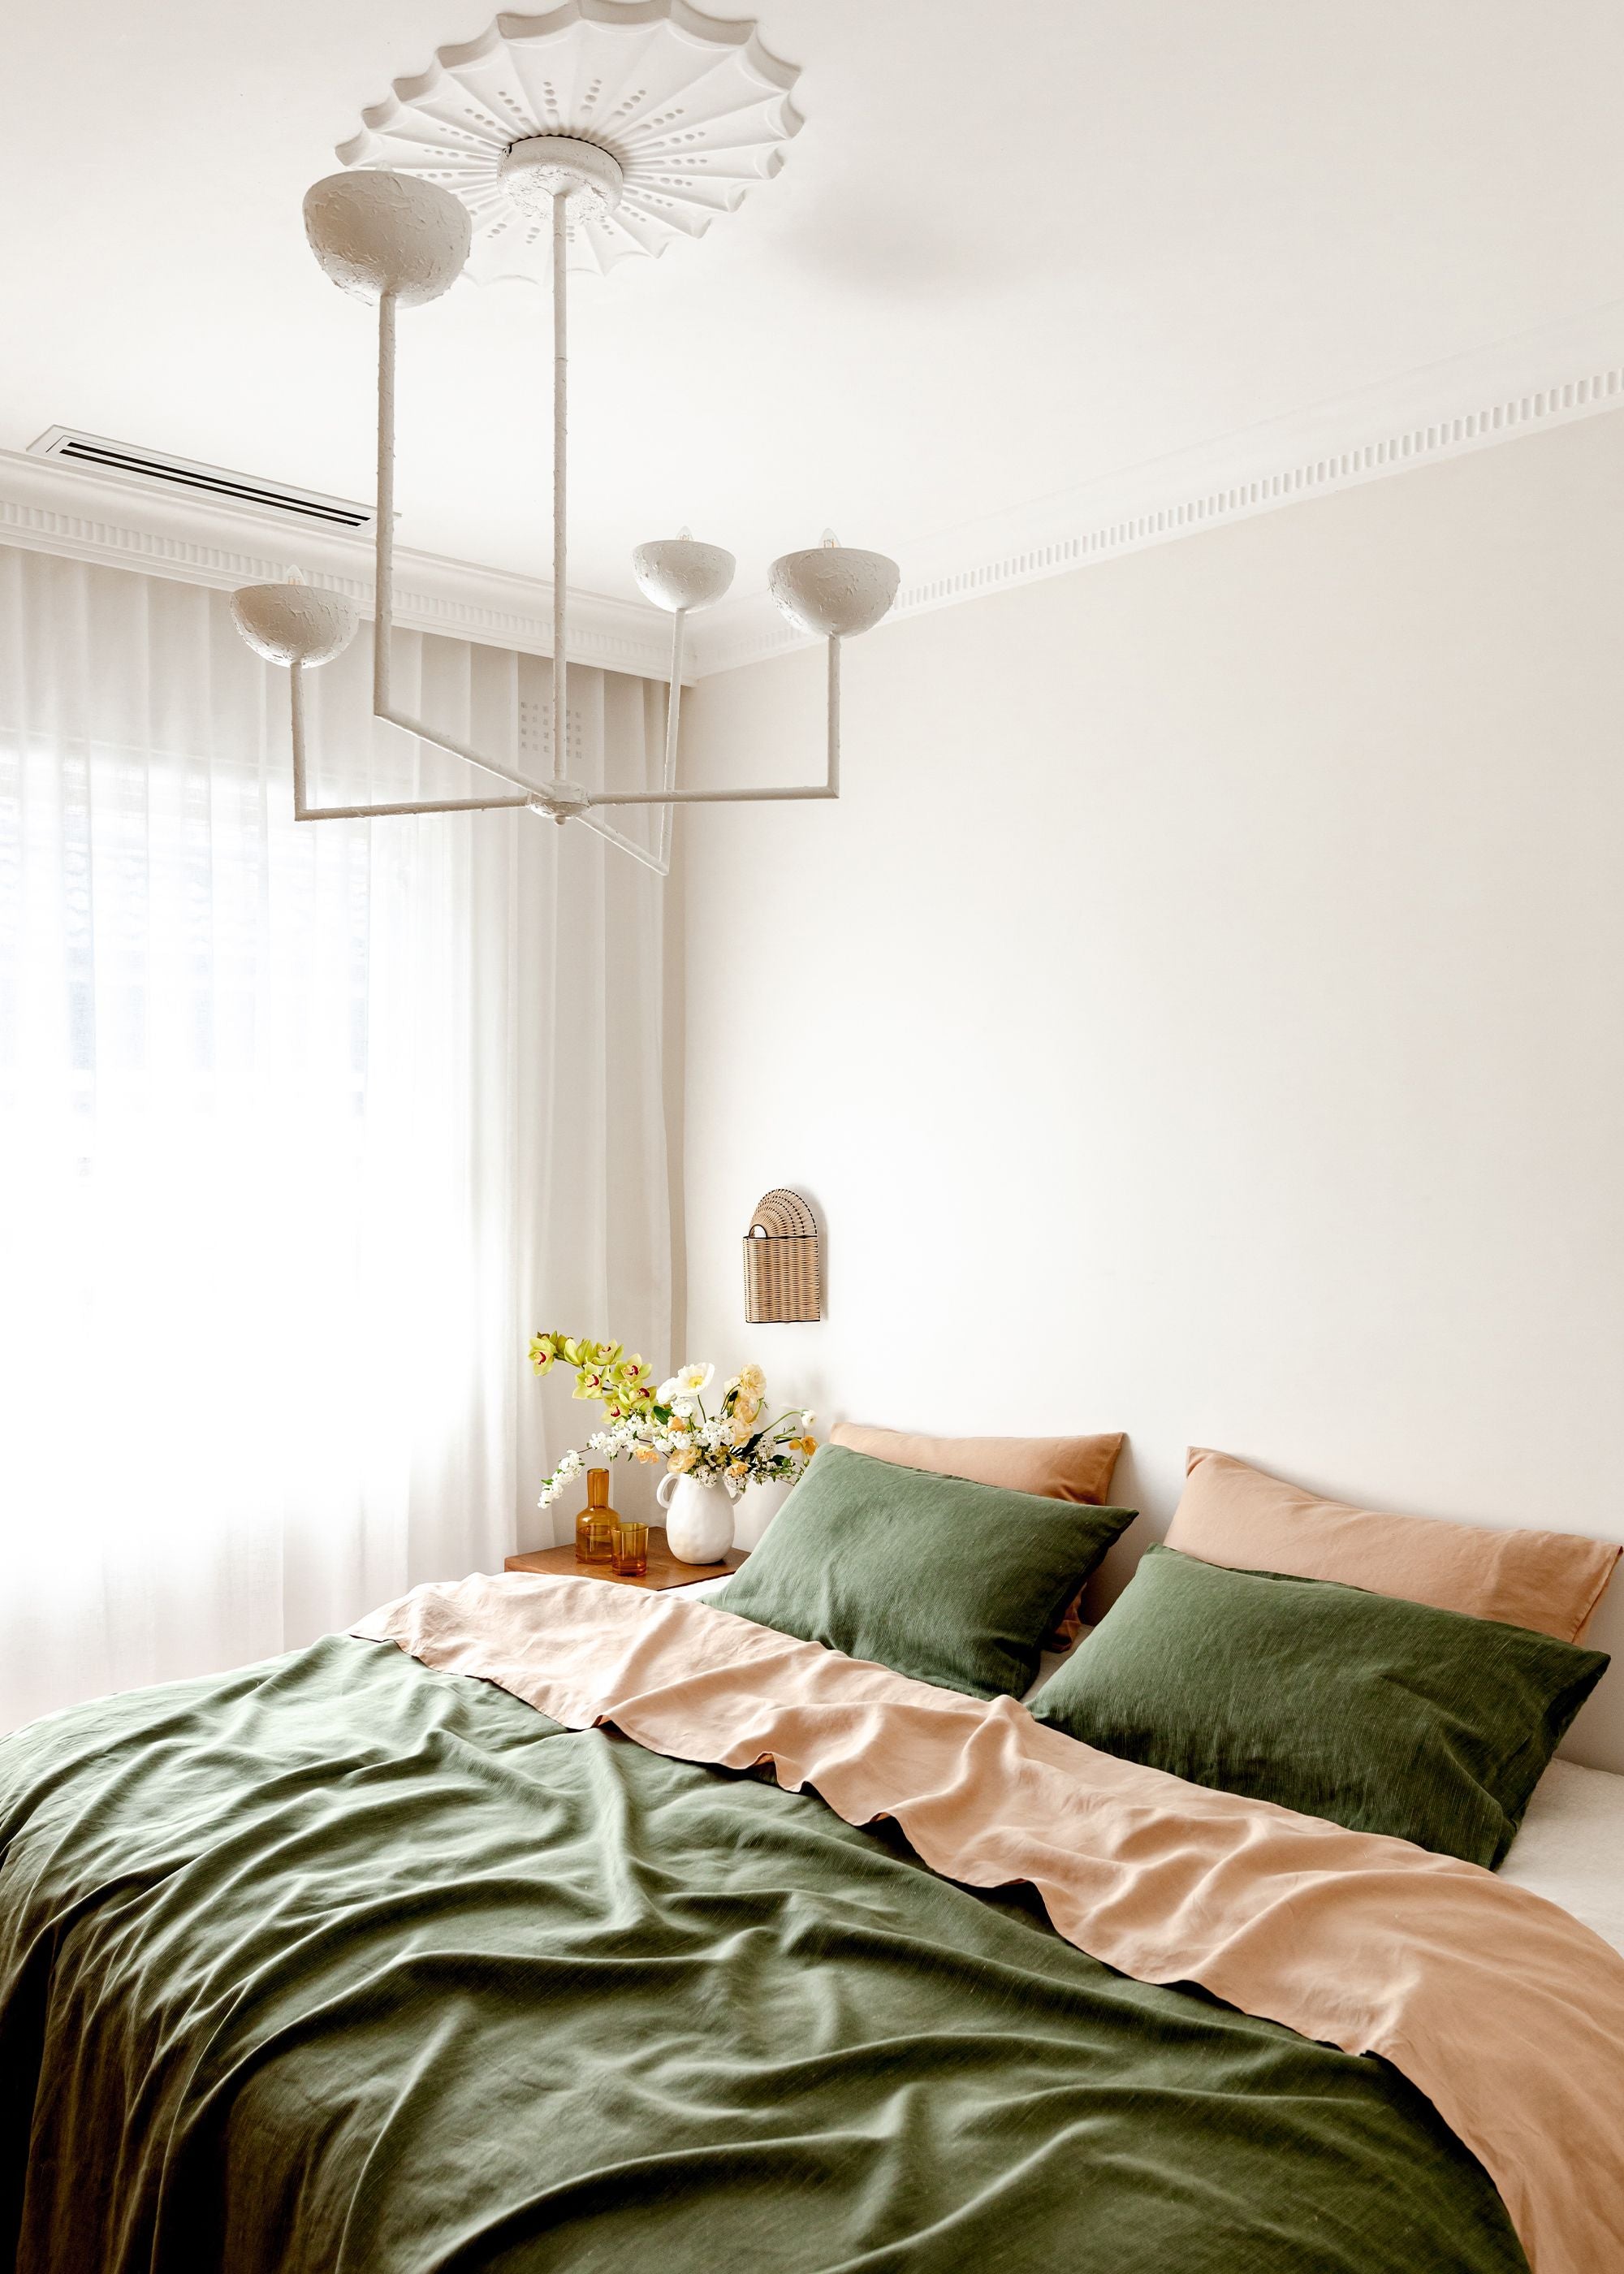 How to Keep Sheets on a Bed: Tips for a Tidy Bed